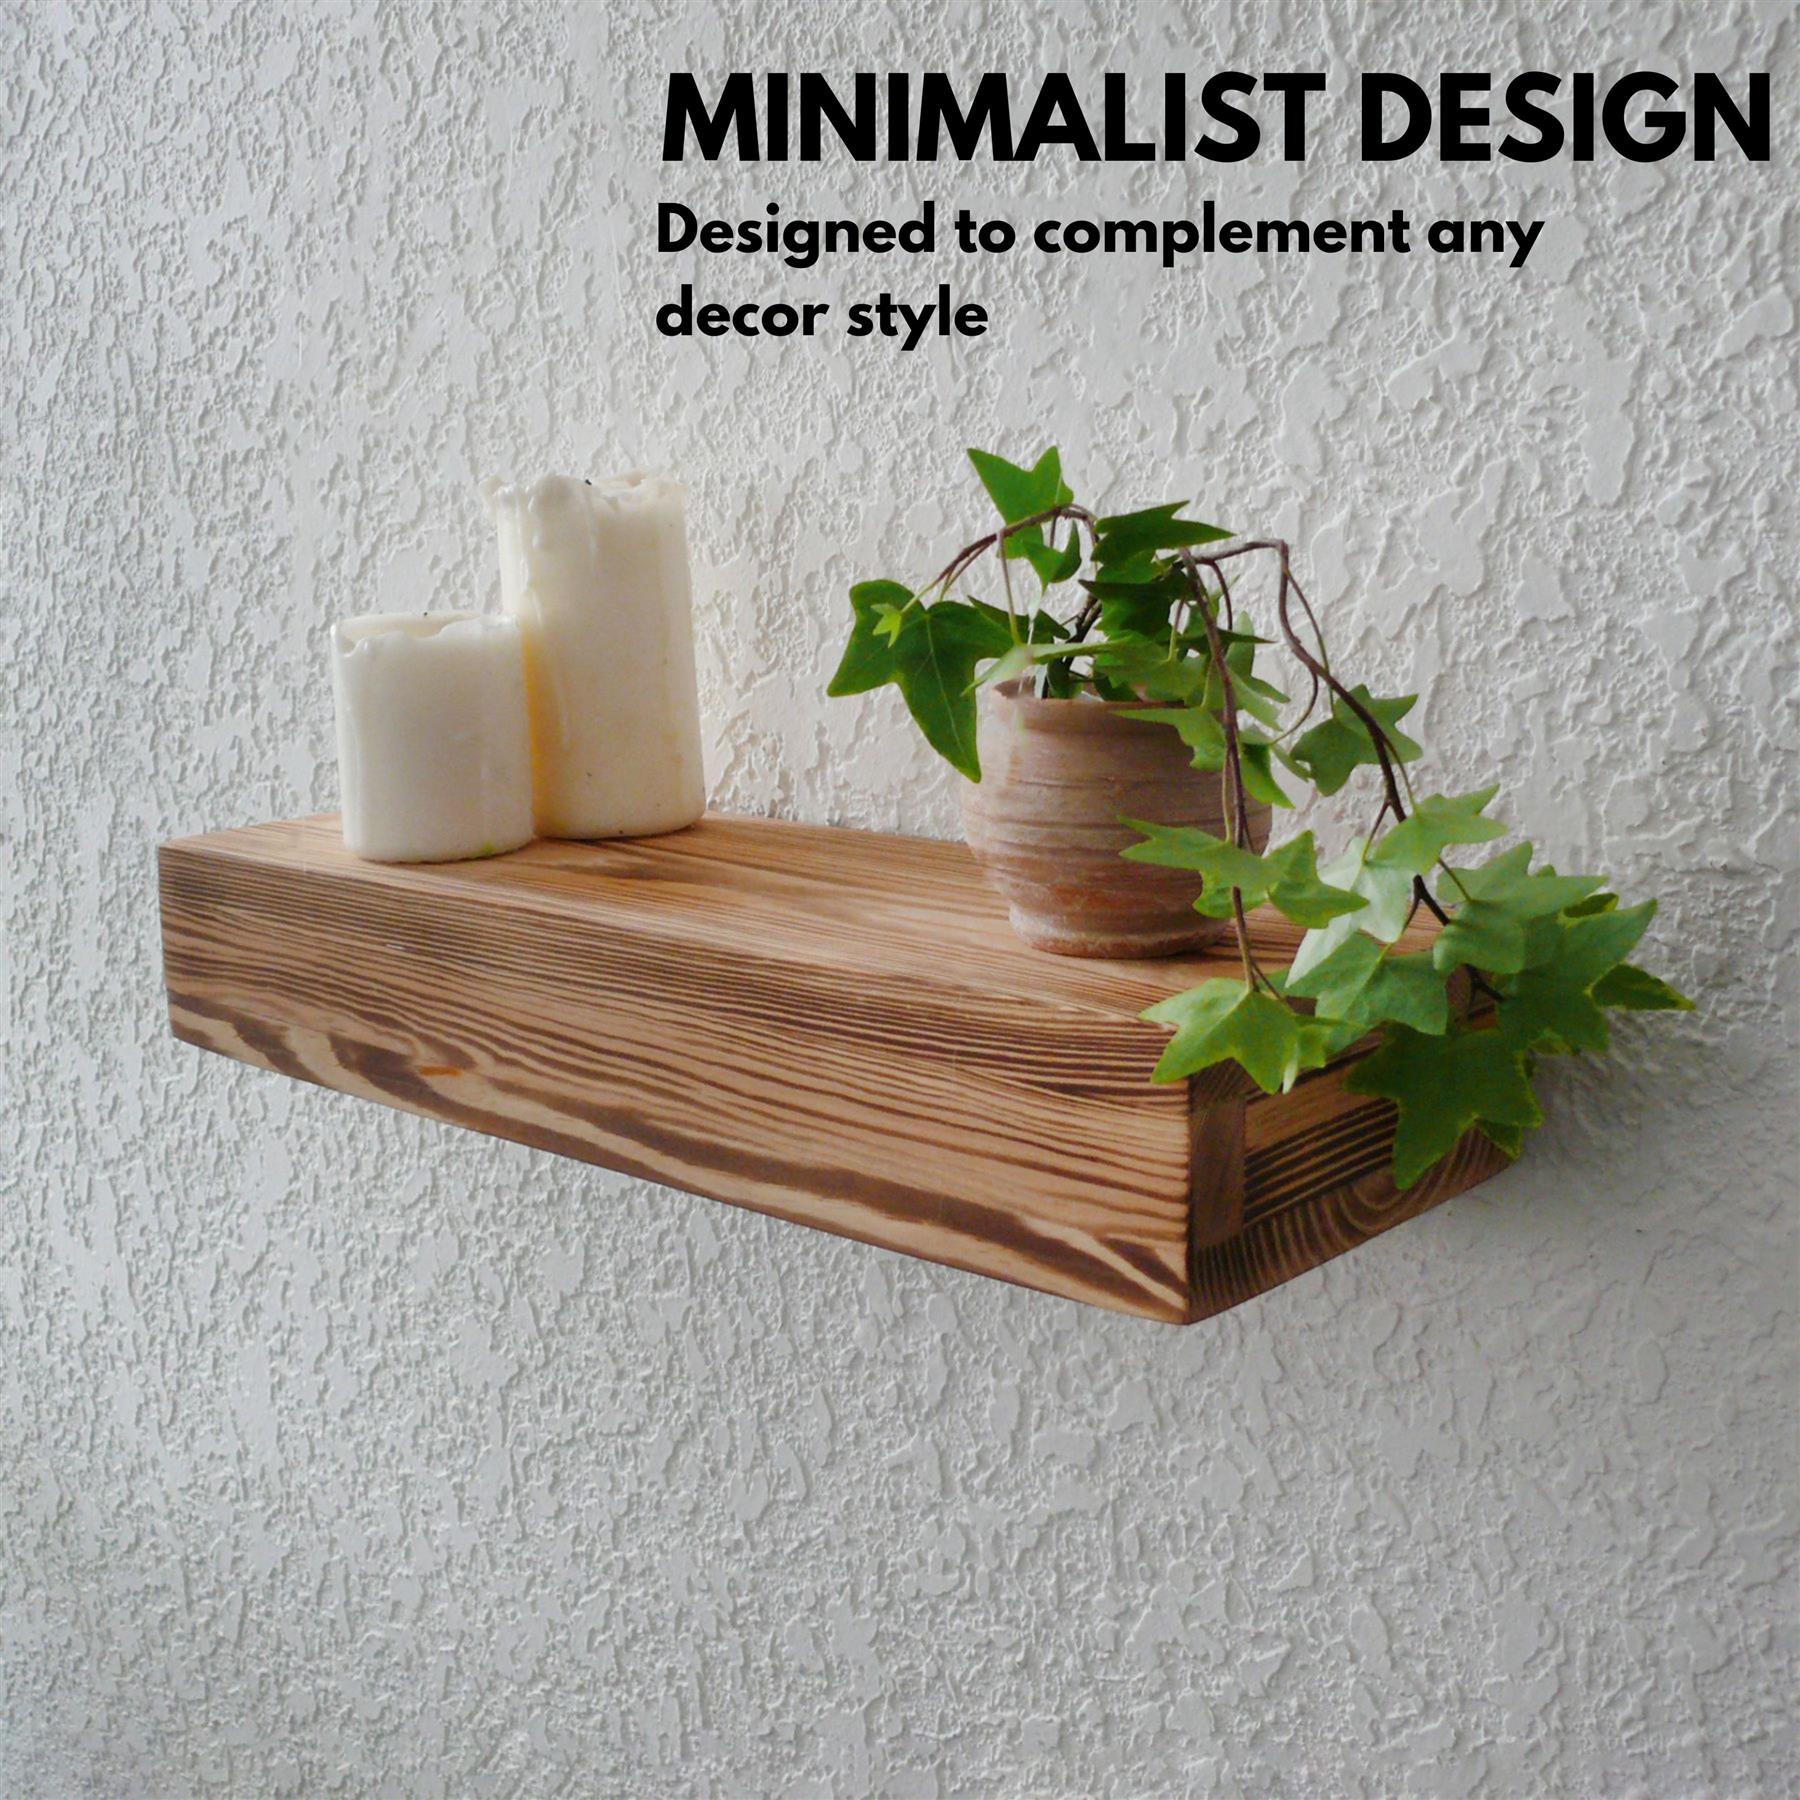 Floating Wood Shelves for Wall Flat Chunky Rustic Wall Mounted Floating Shelves